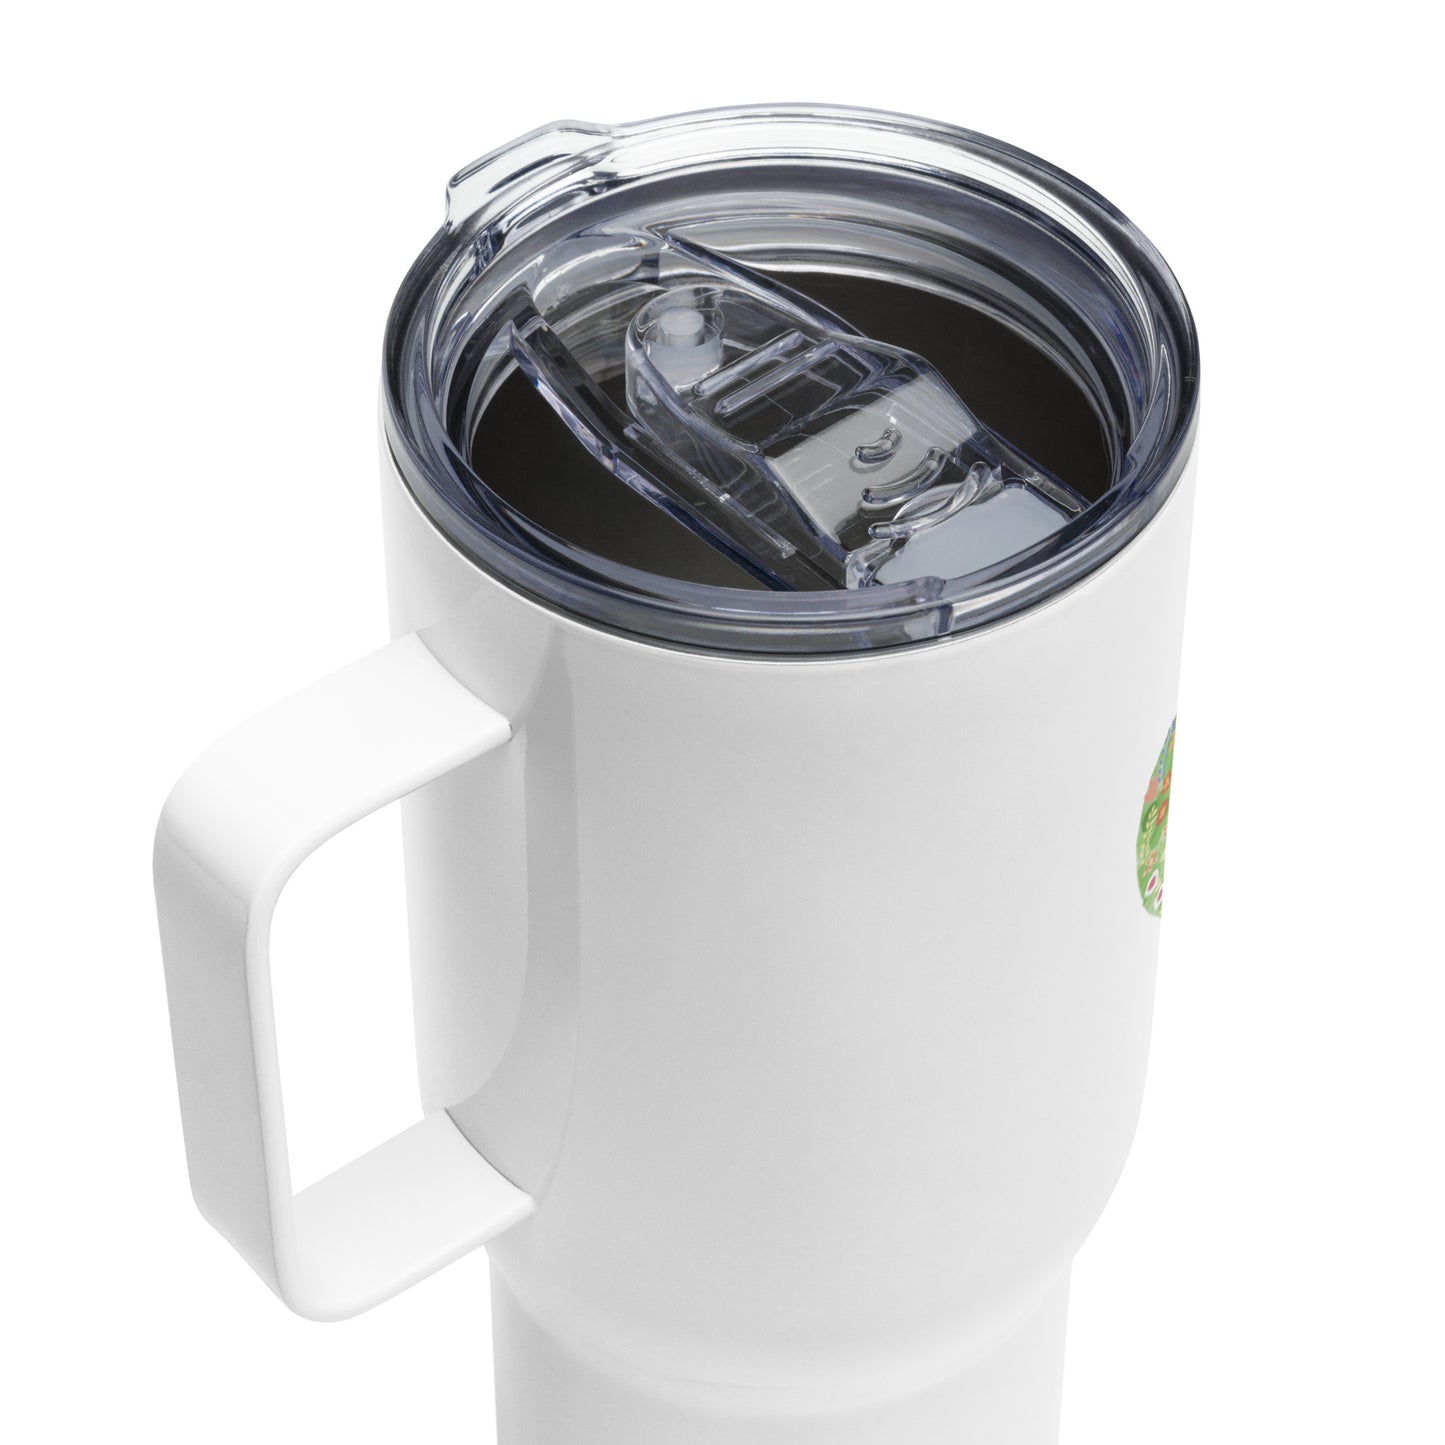 Travel mug with a handle (Personalized)